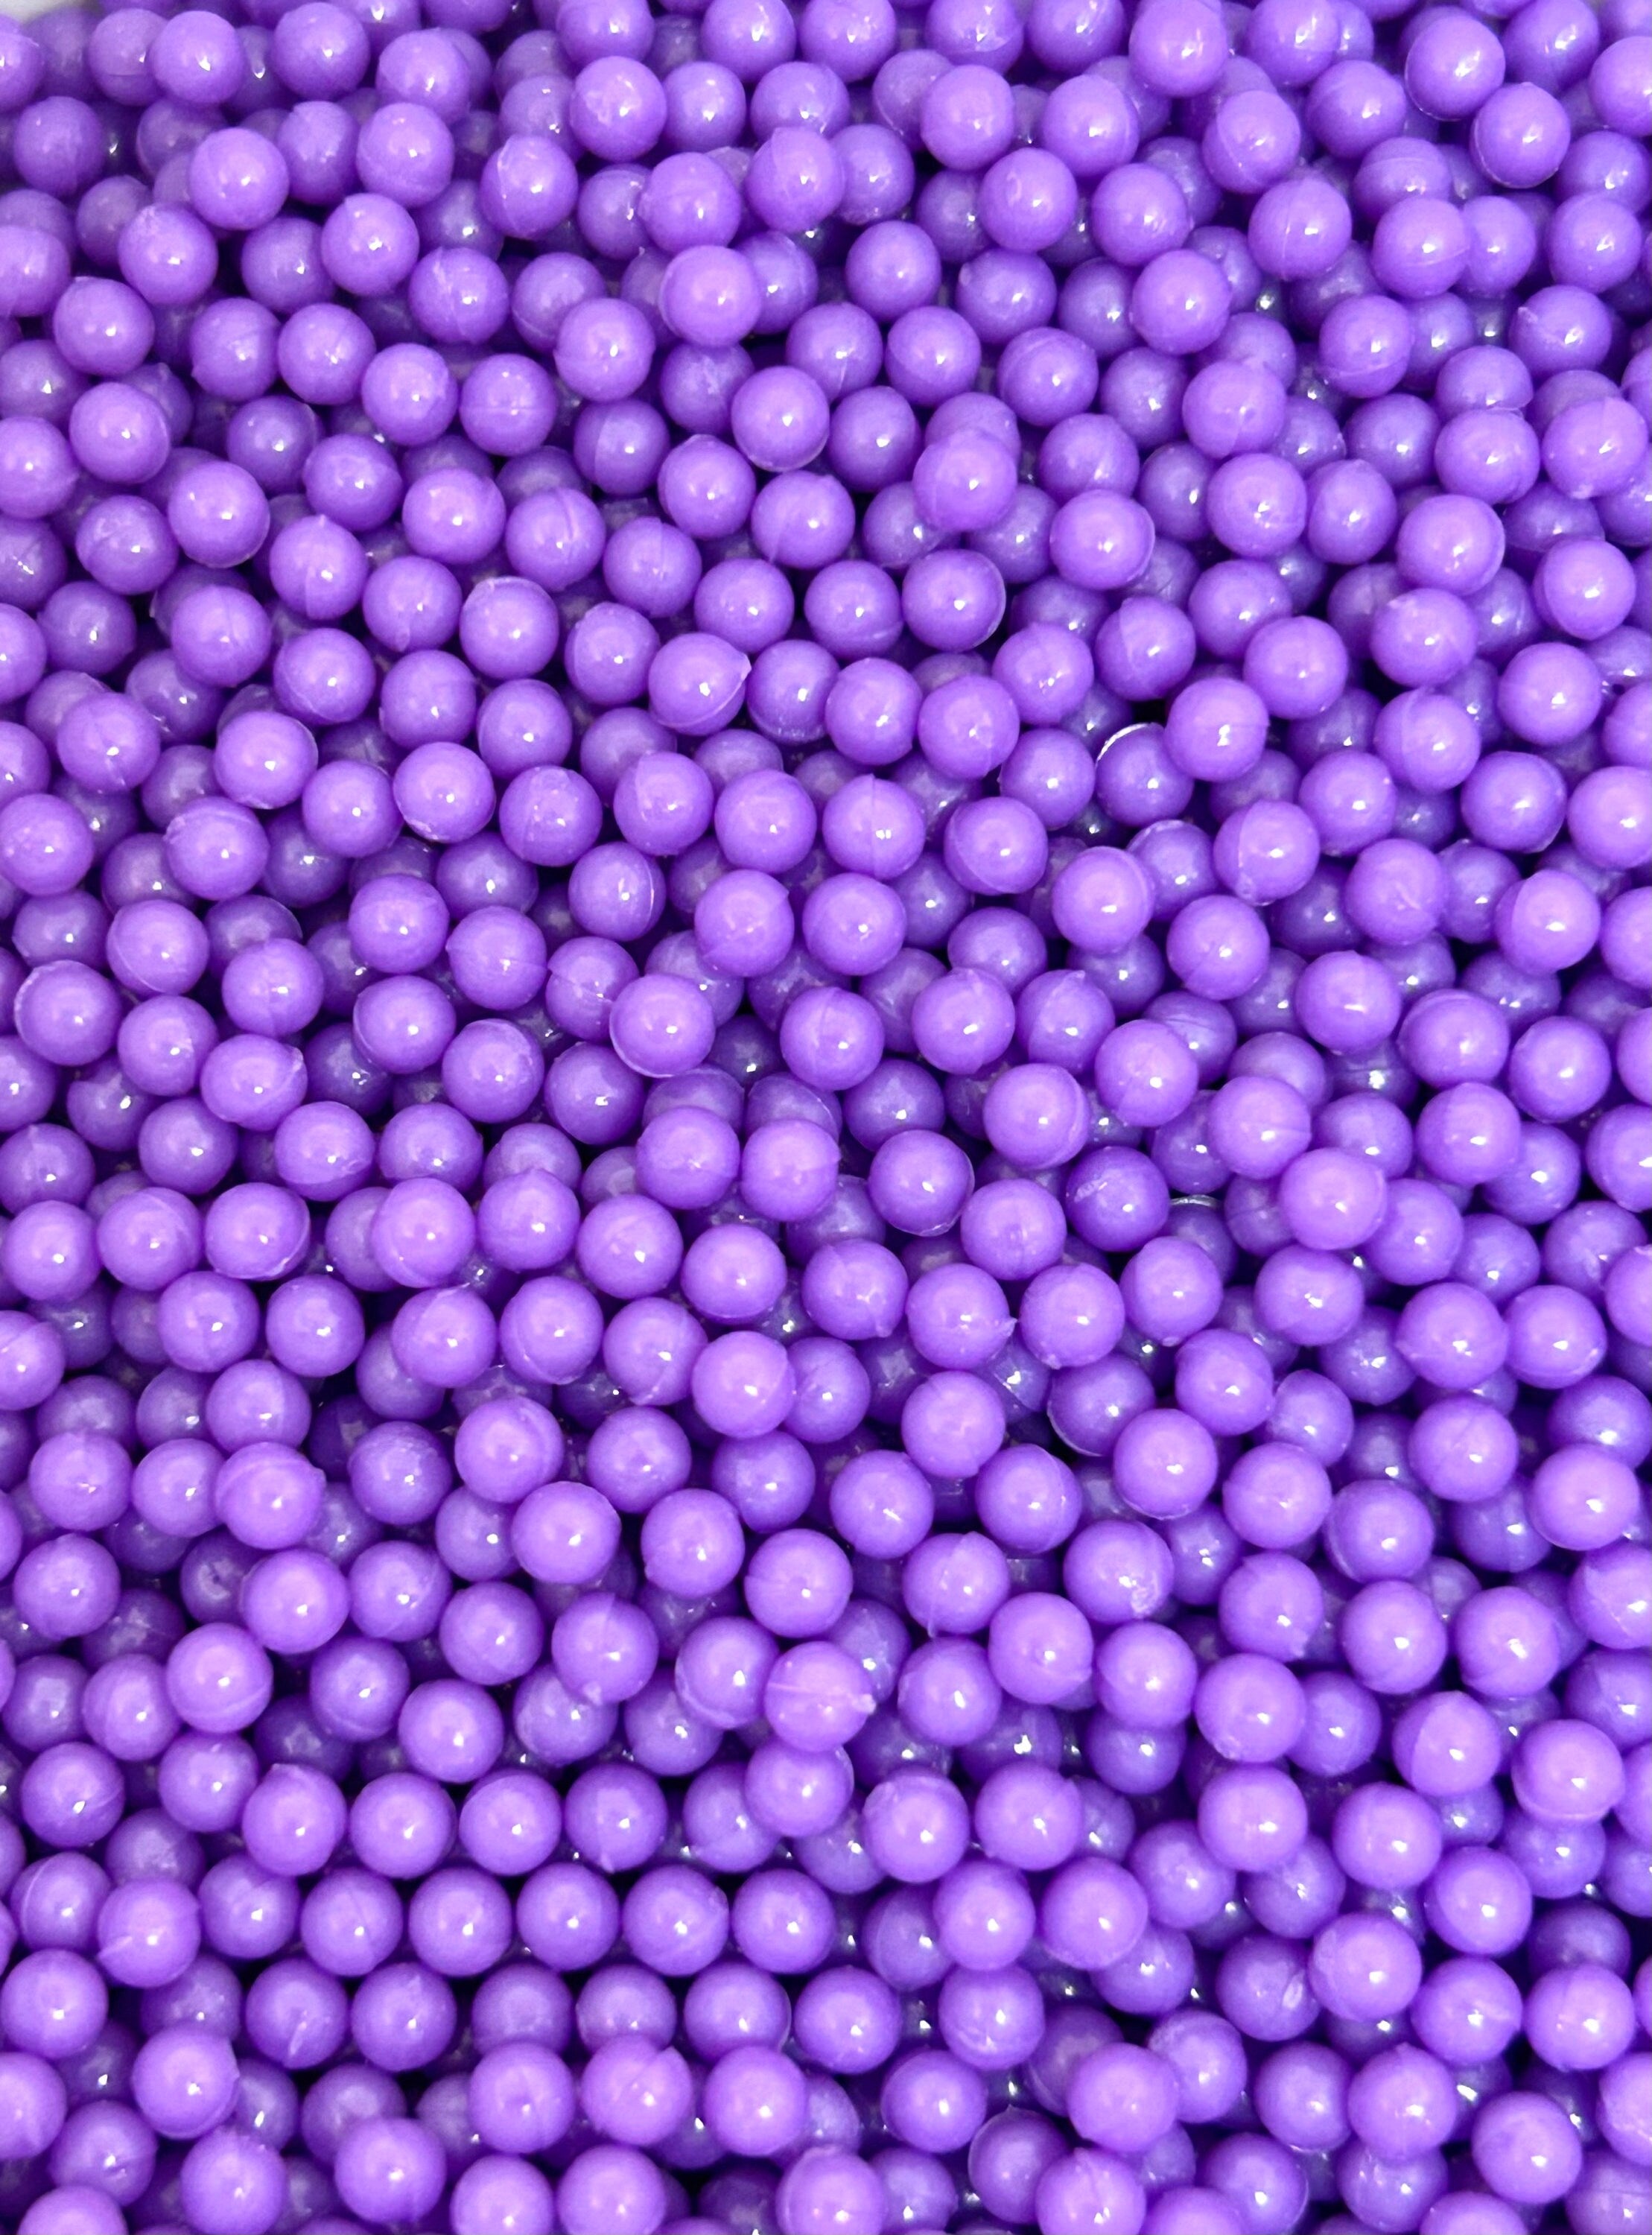 Tiny Fake Lavender Purple Sprinkles, Faux Sprinkles for Slime, Add-ins, Mixers, Nail Art